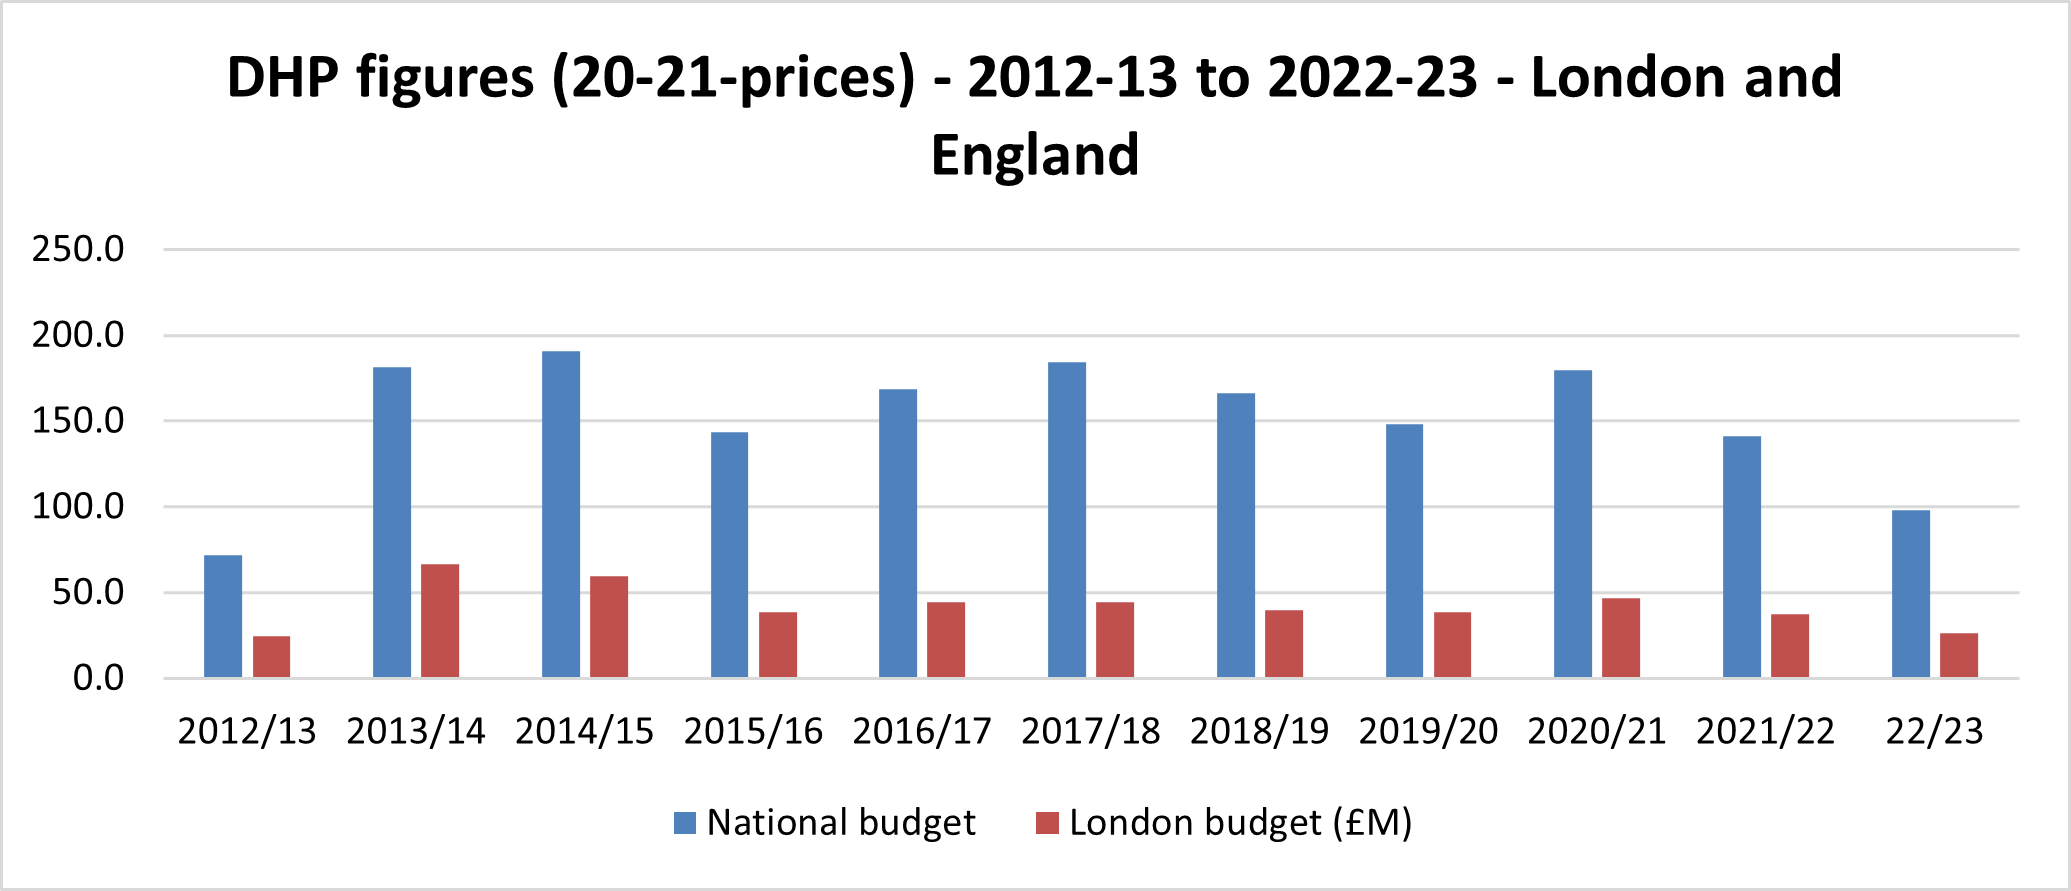  Discretionary Housing Payment figures 2012 to 2023 London and England